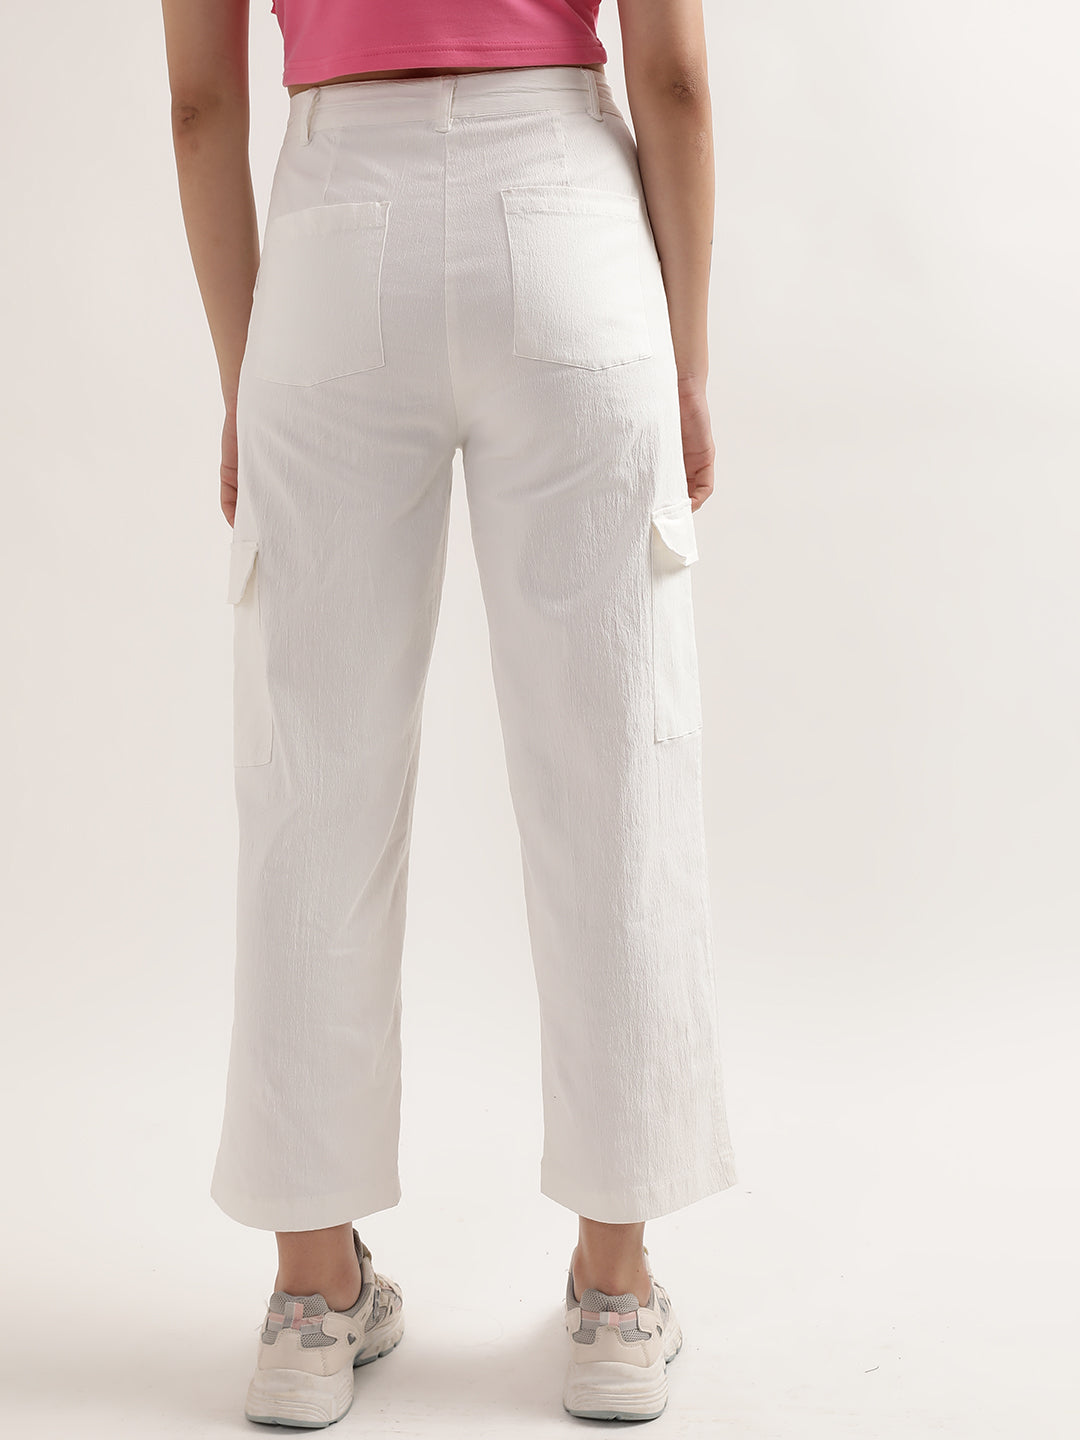 Buy White and Beige Combo of 2 Stripe Women Trouser Cotton for Best Price  Reviews Free Shipping